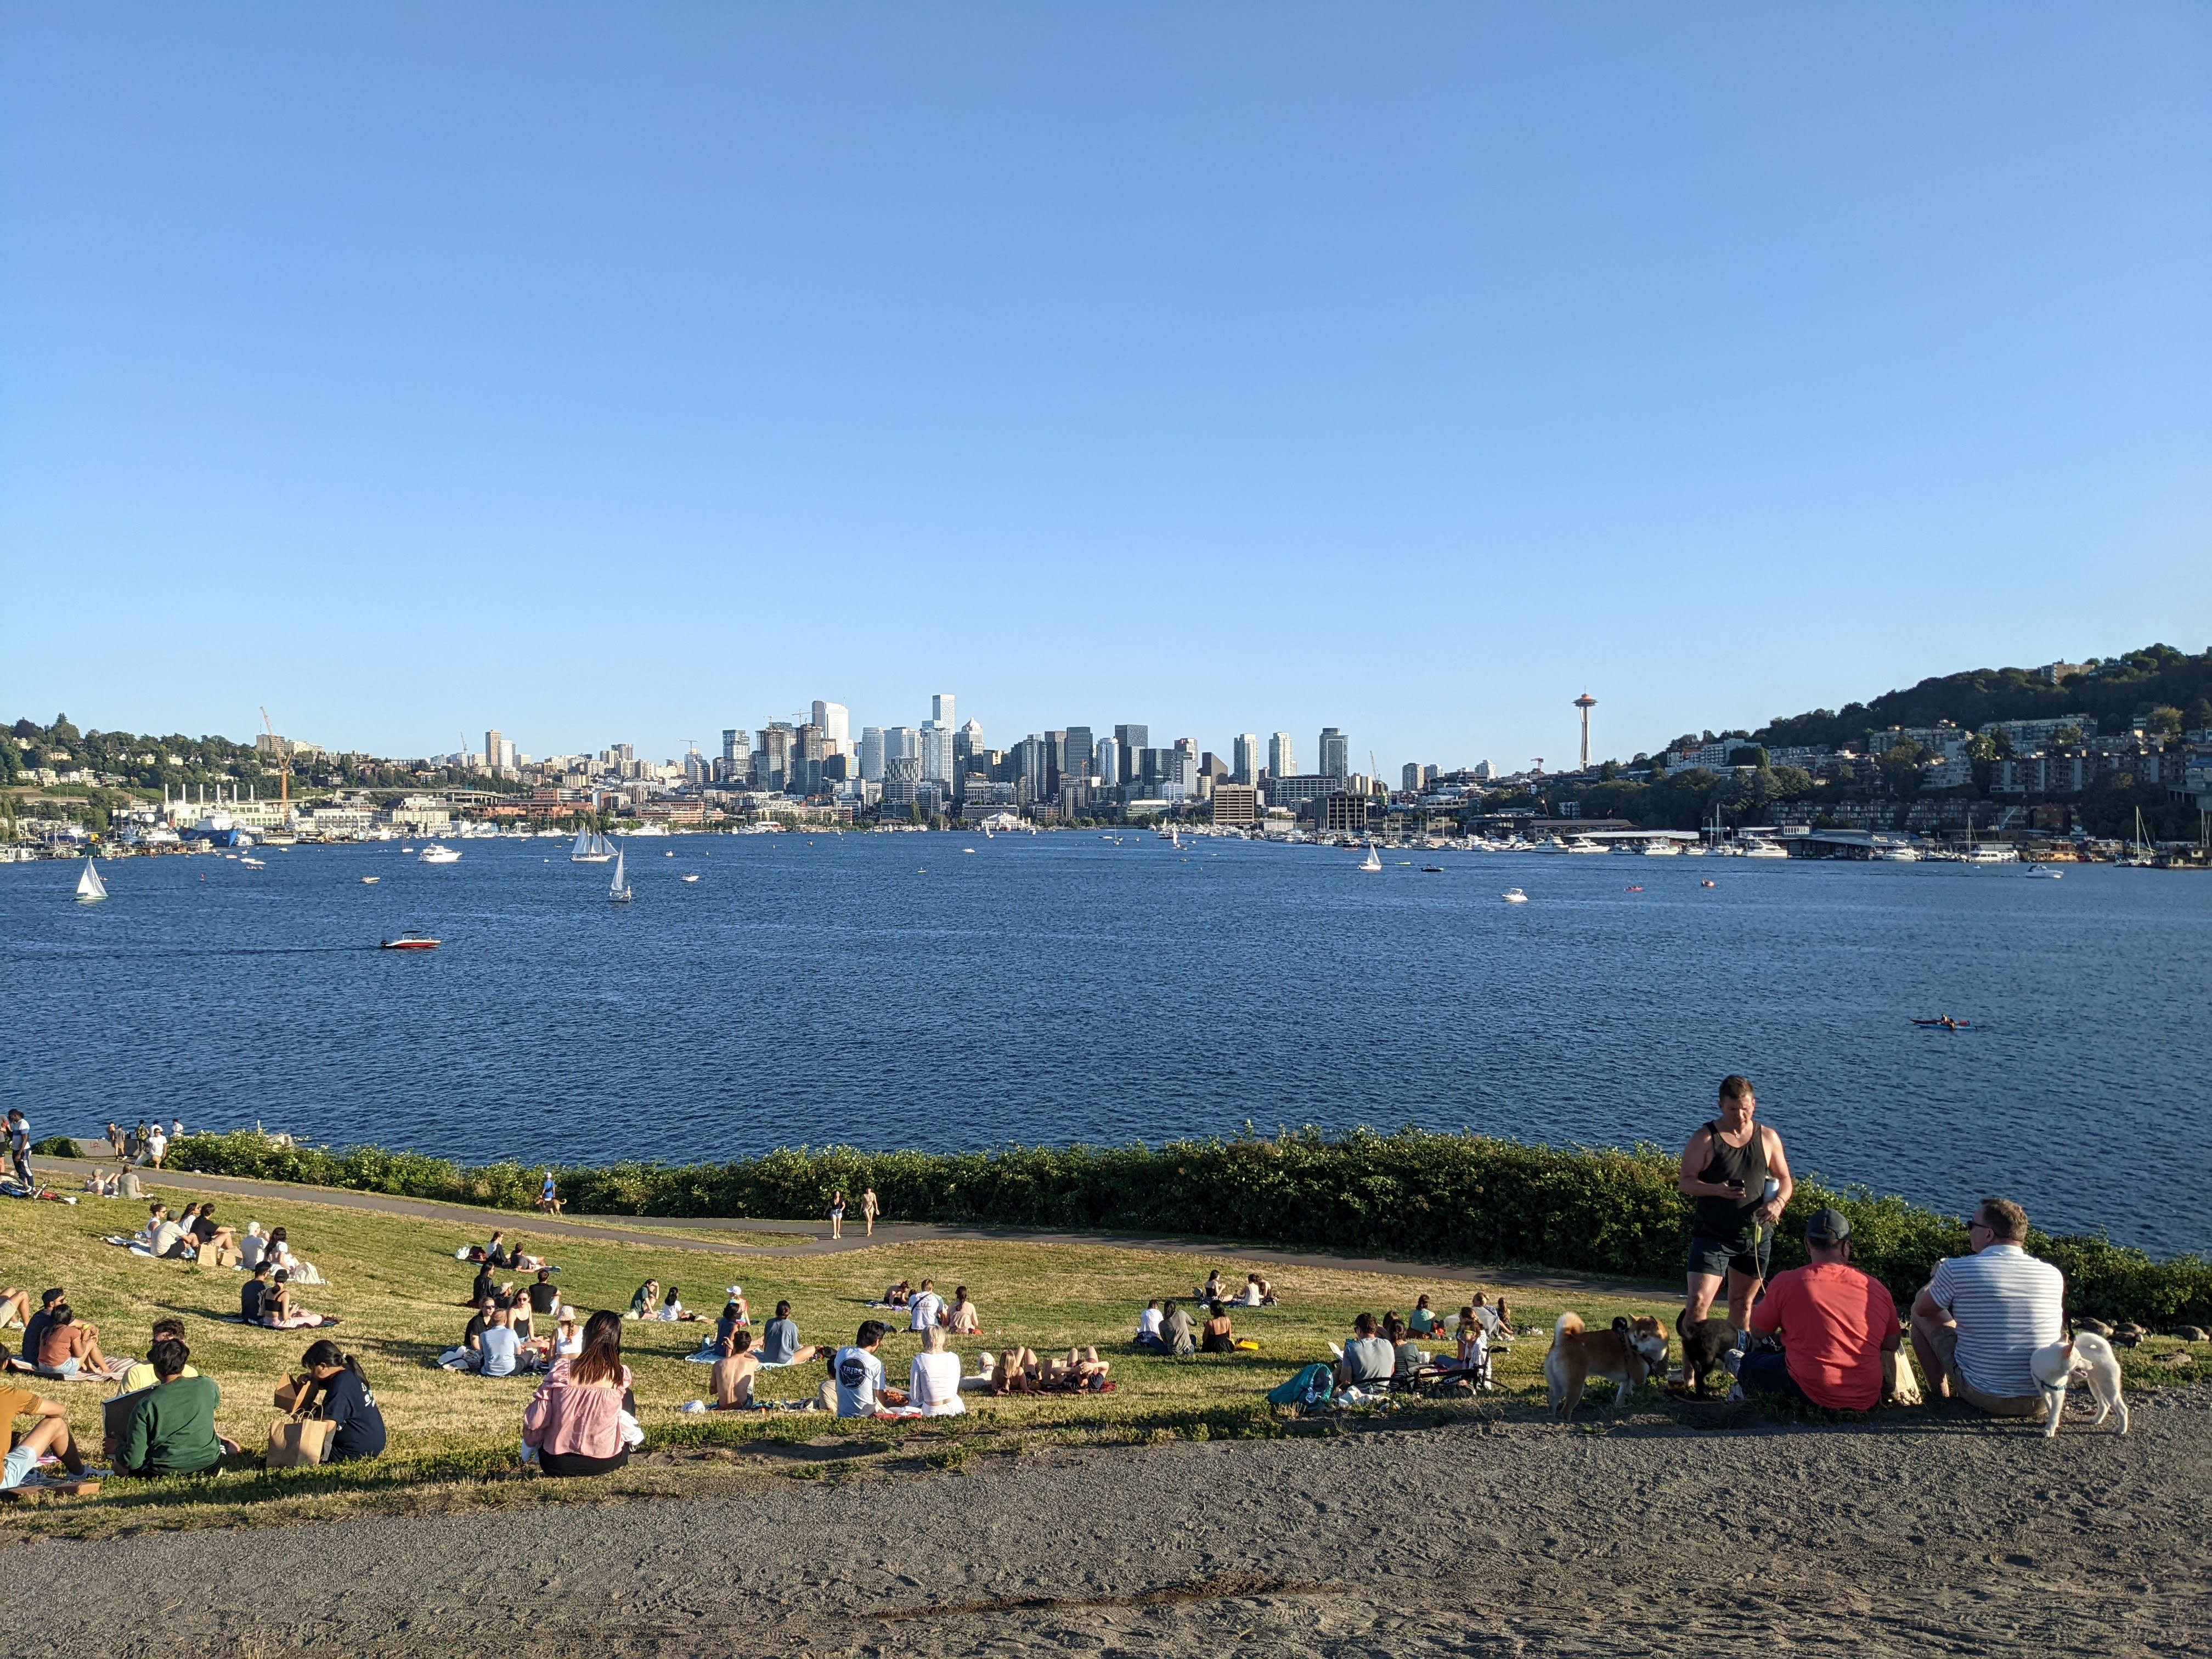 Gasworks. One of my favourite views of Seattle.